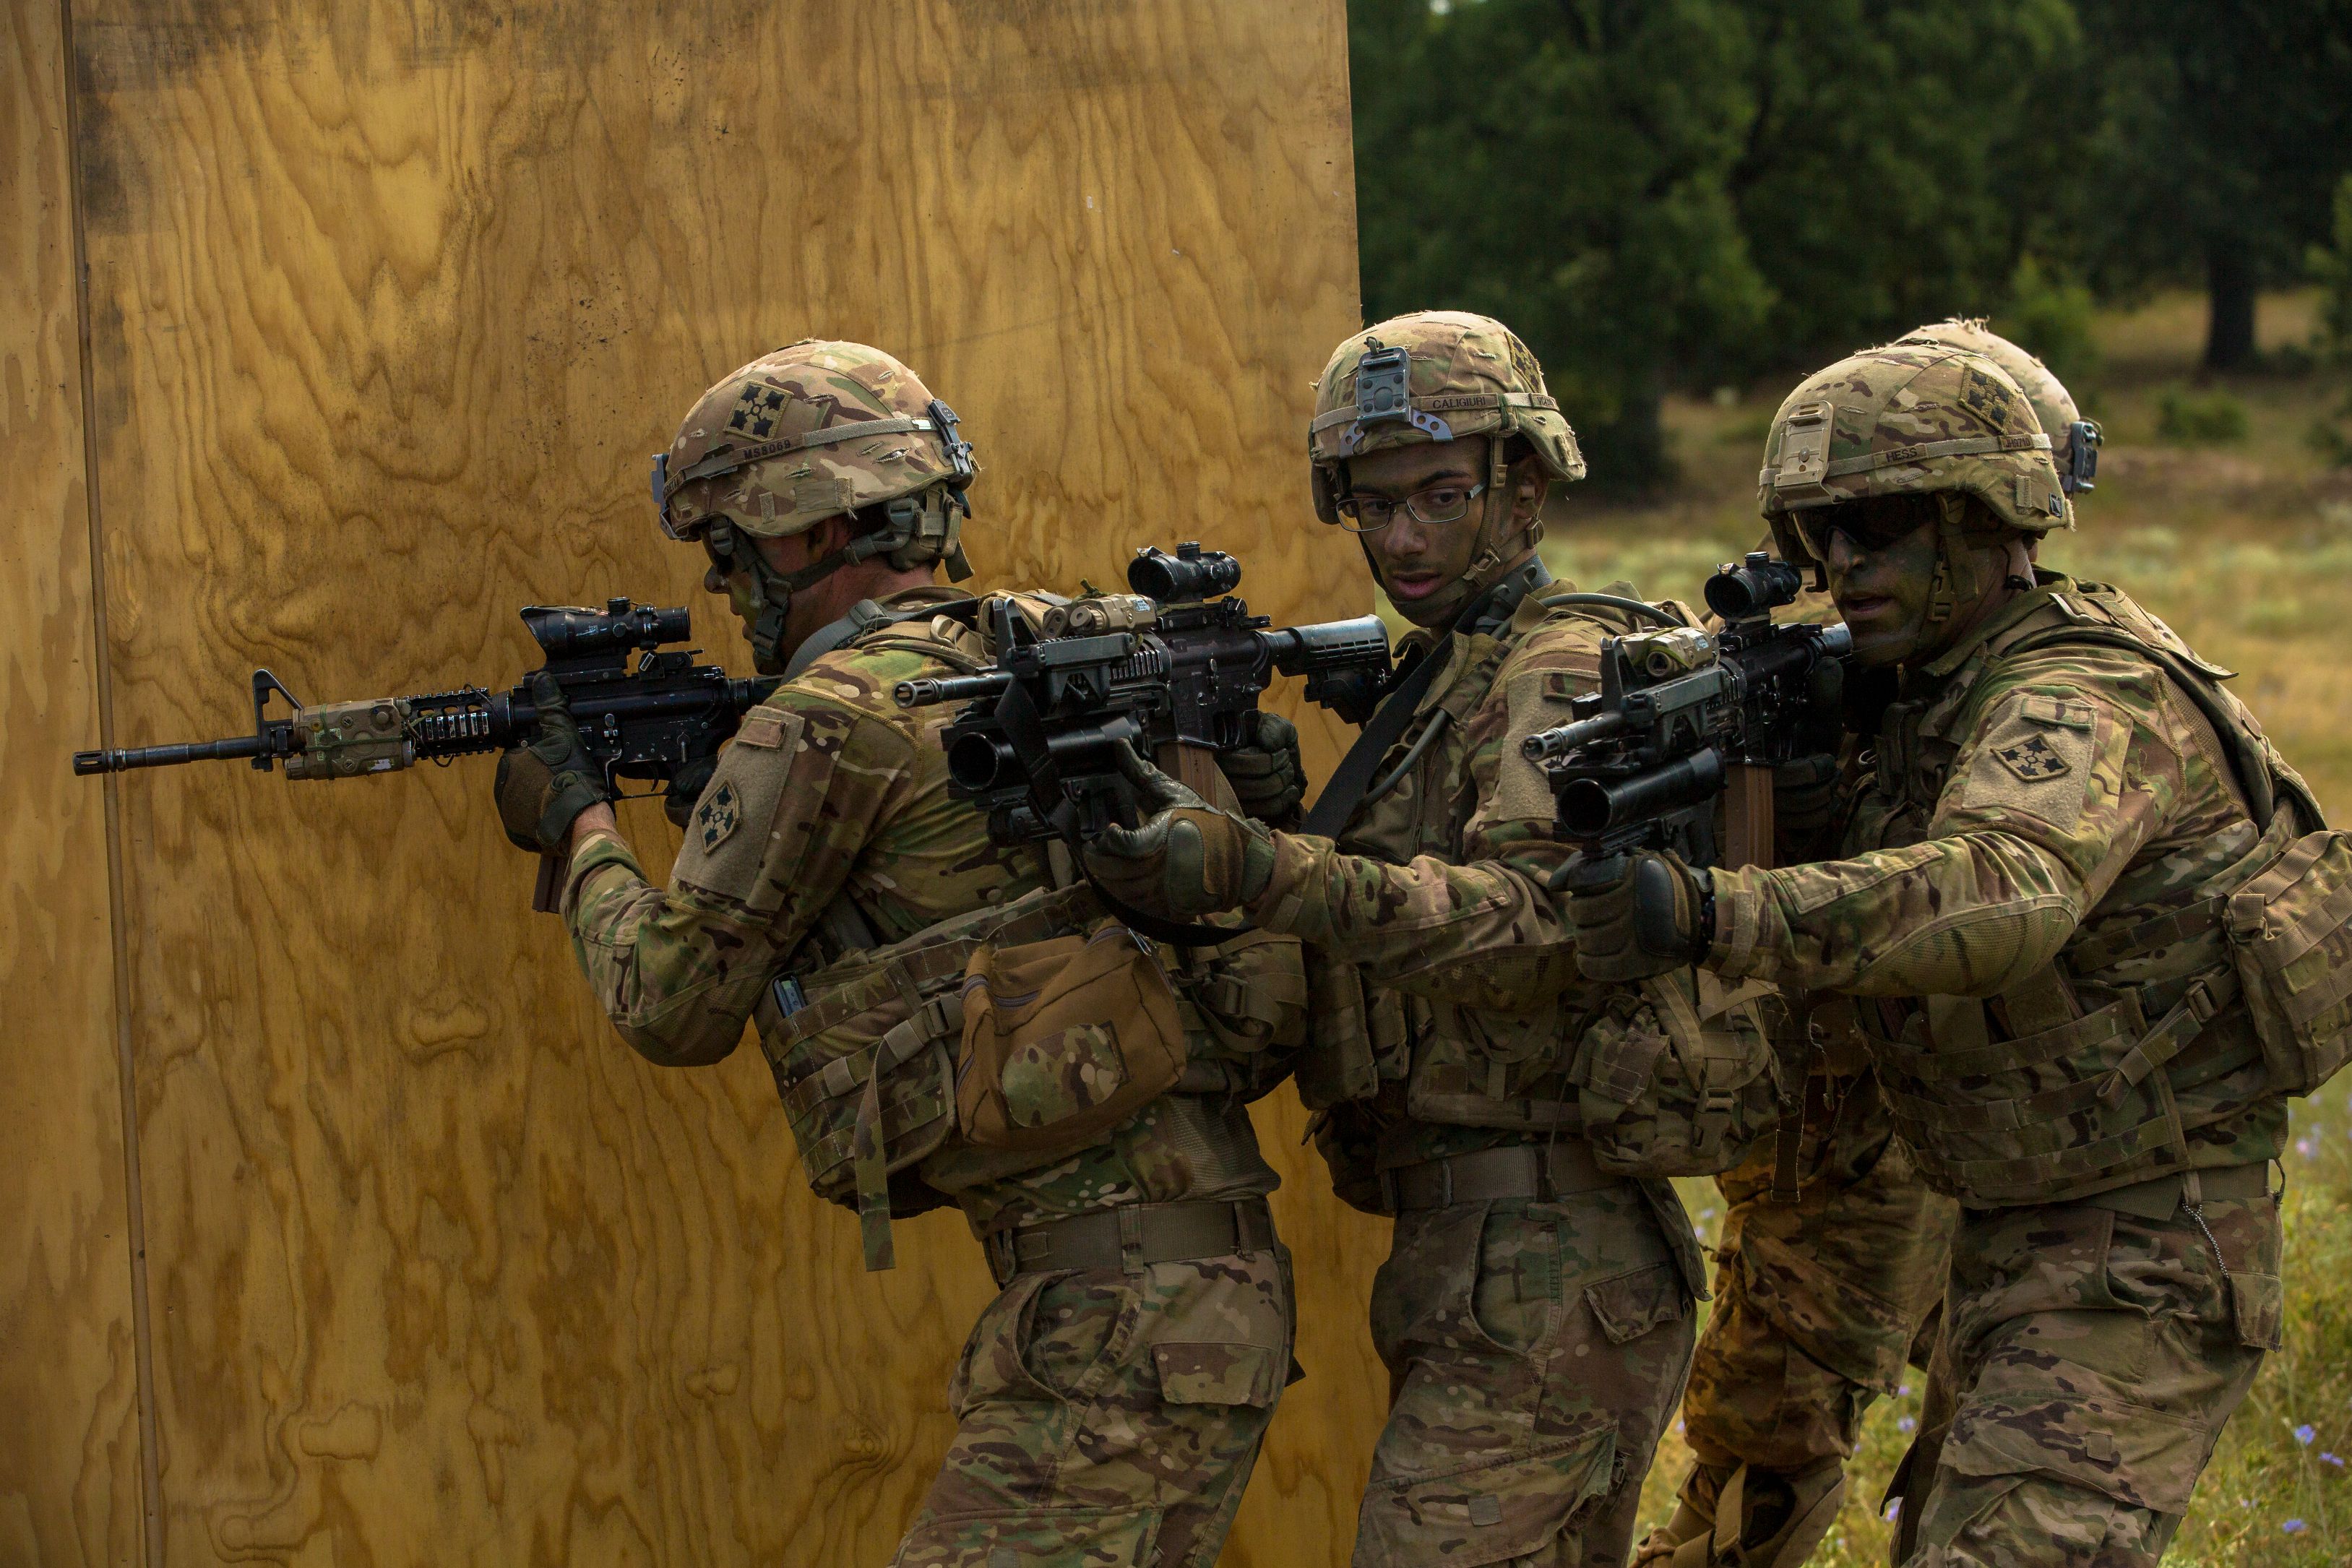 U.S. Army soldier with 1st battalion, 8th infantry regiment, 3rd armored brigade combat team, 4th infantry division prepare to breach a room during urban operations training for the 2017 Saber Guardian Exercise at Koren, Bulgaria, July 15, 2017.